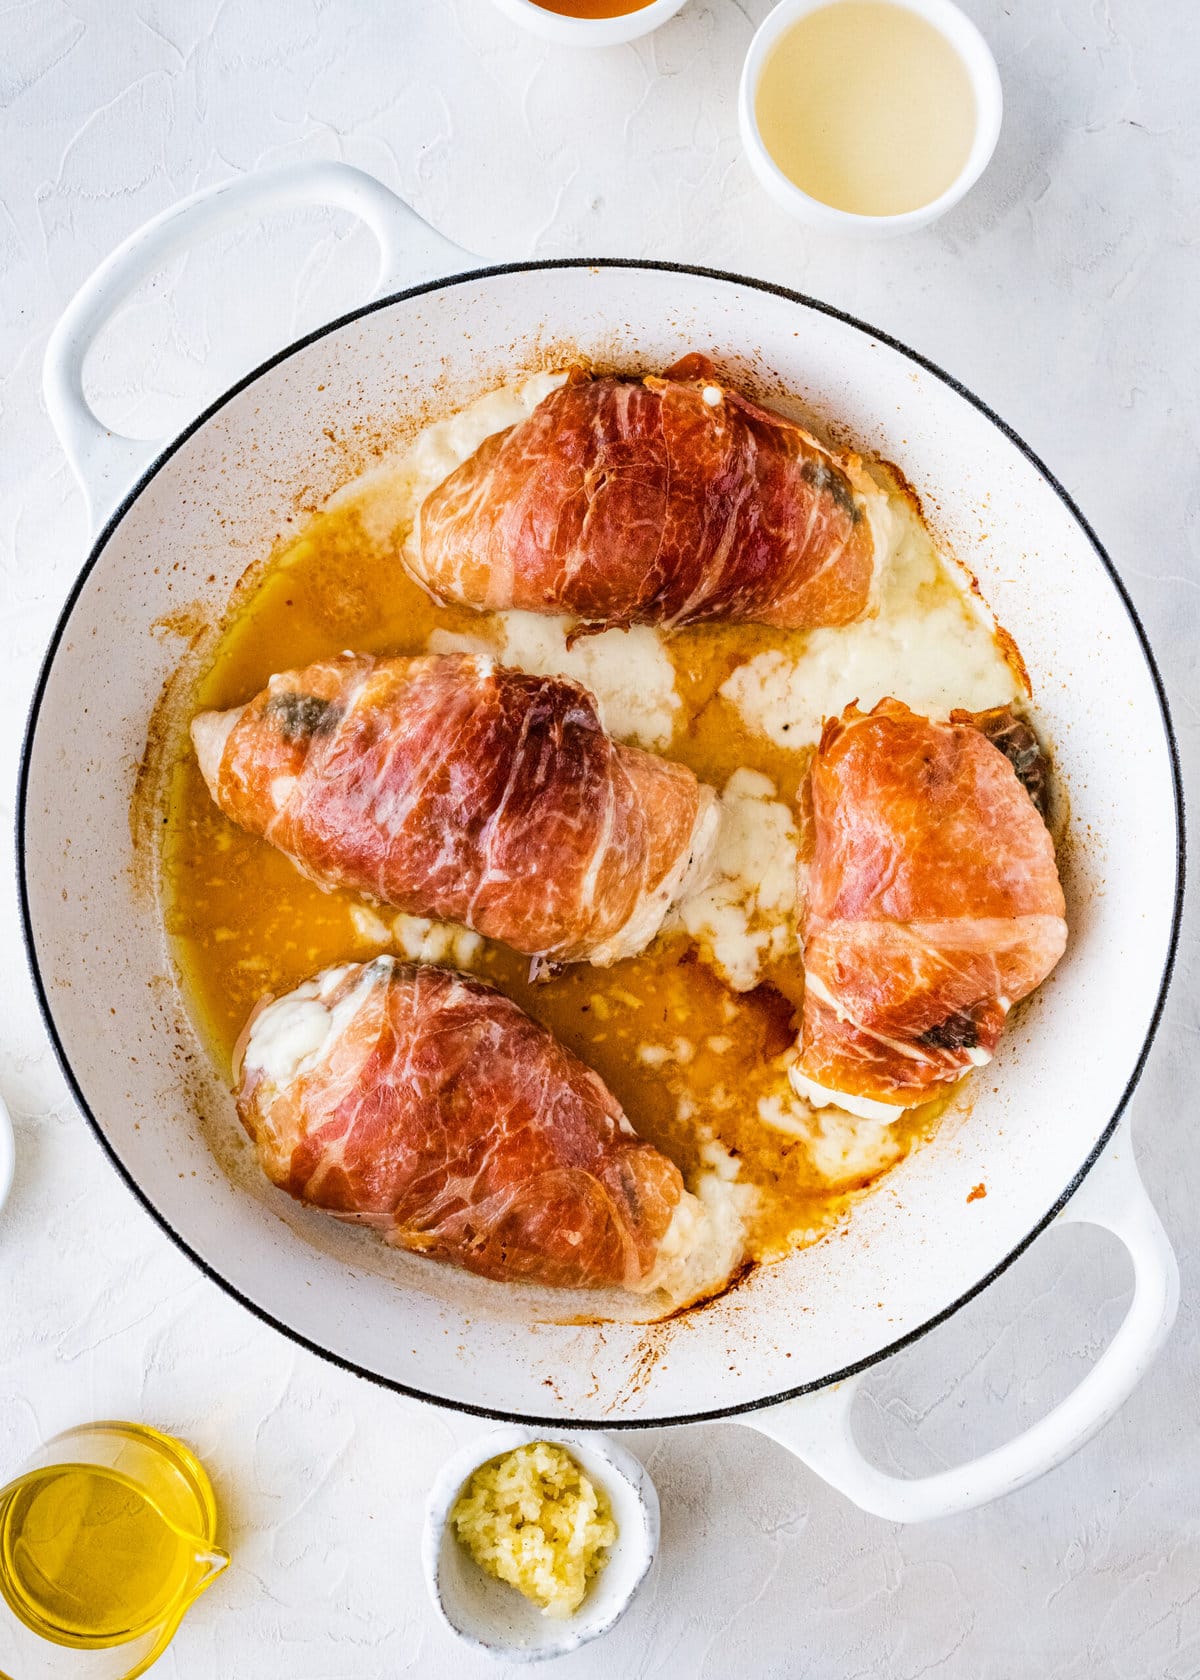 How to make Mozzarella stuffed Chicken chicken- stuffed chicken wrapped in parma ham placed in pan and browned on both sides. Finish baking in the oven.